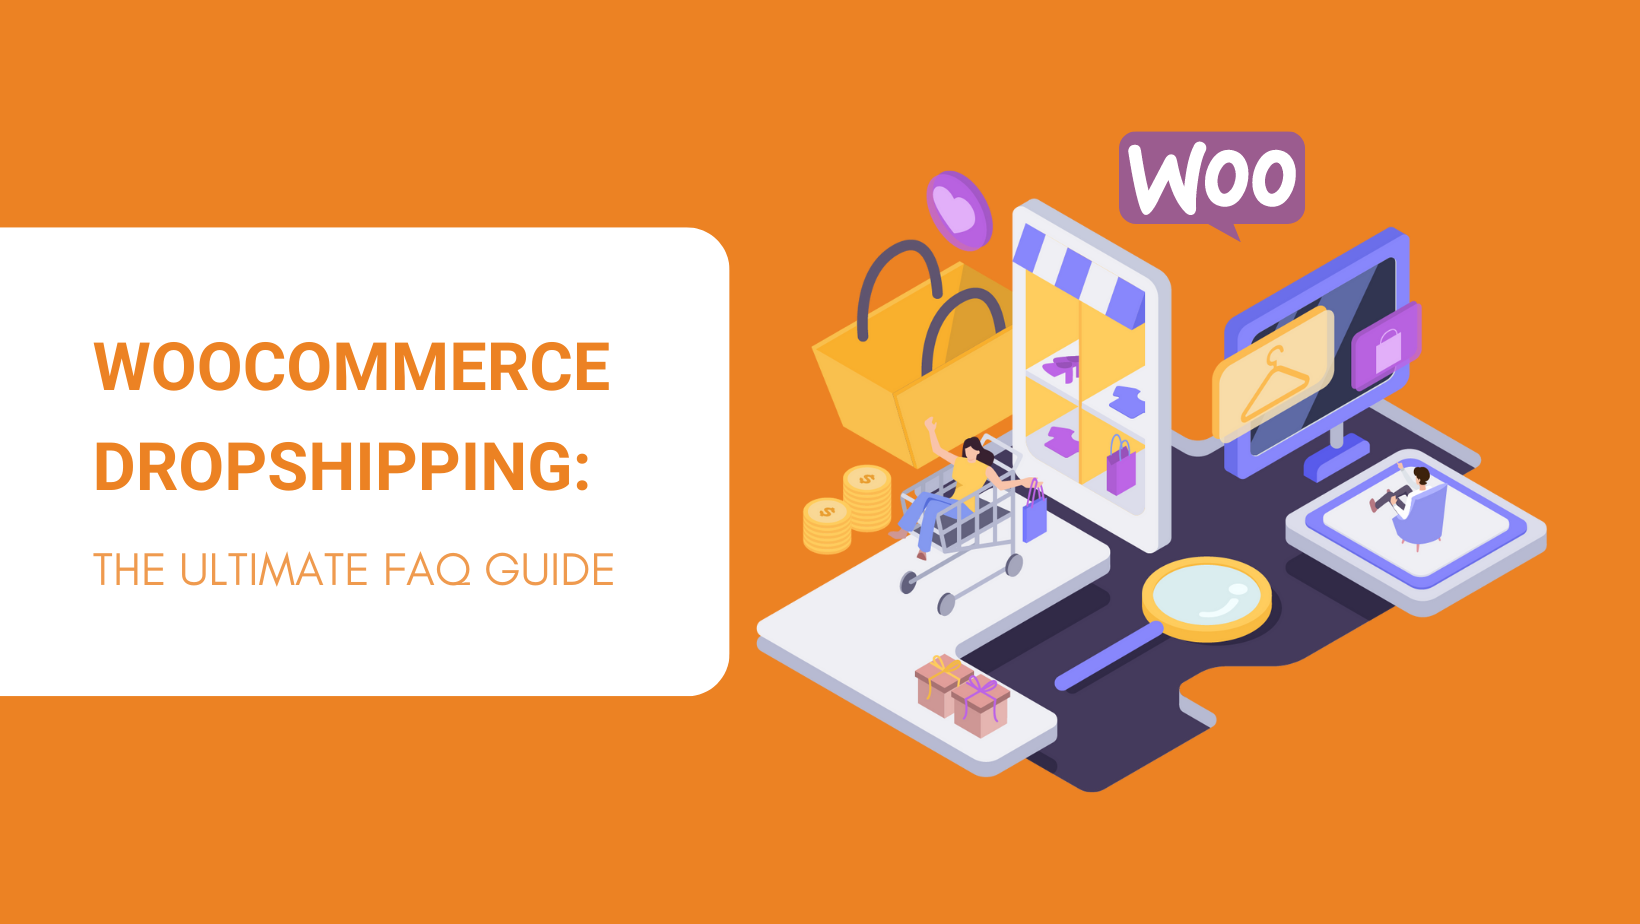 Dropshipping Q&A  Top 12 Frequently Asked Questions from